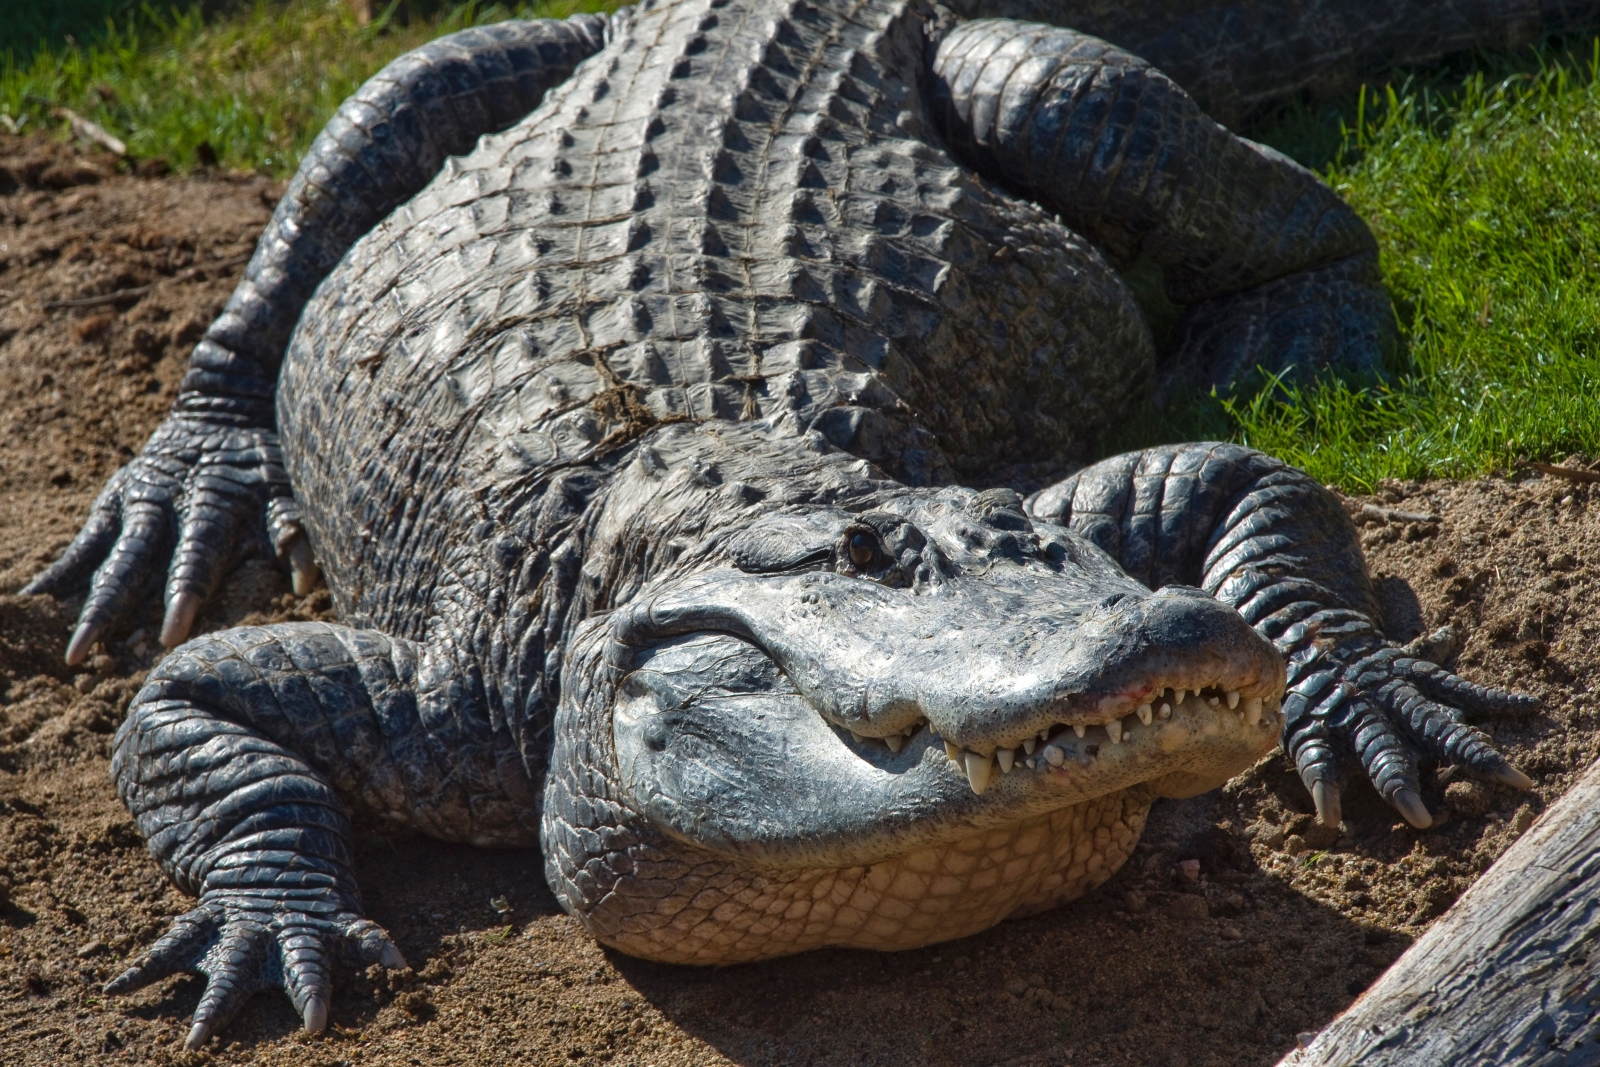 Texas reptile sanctuary with 450 alligators on high alert as